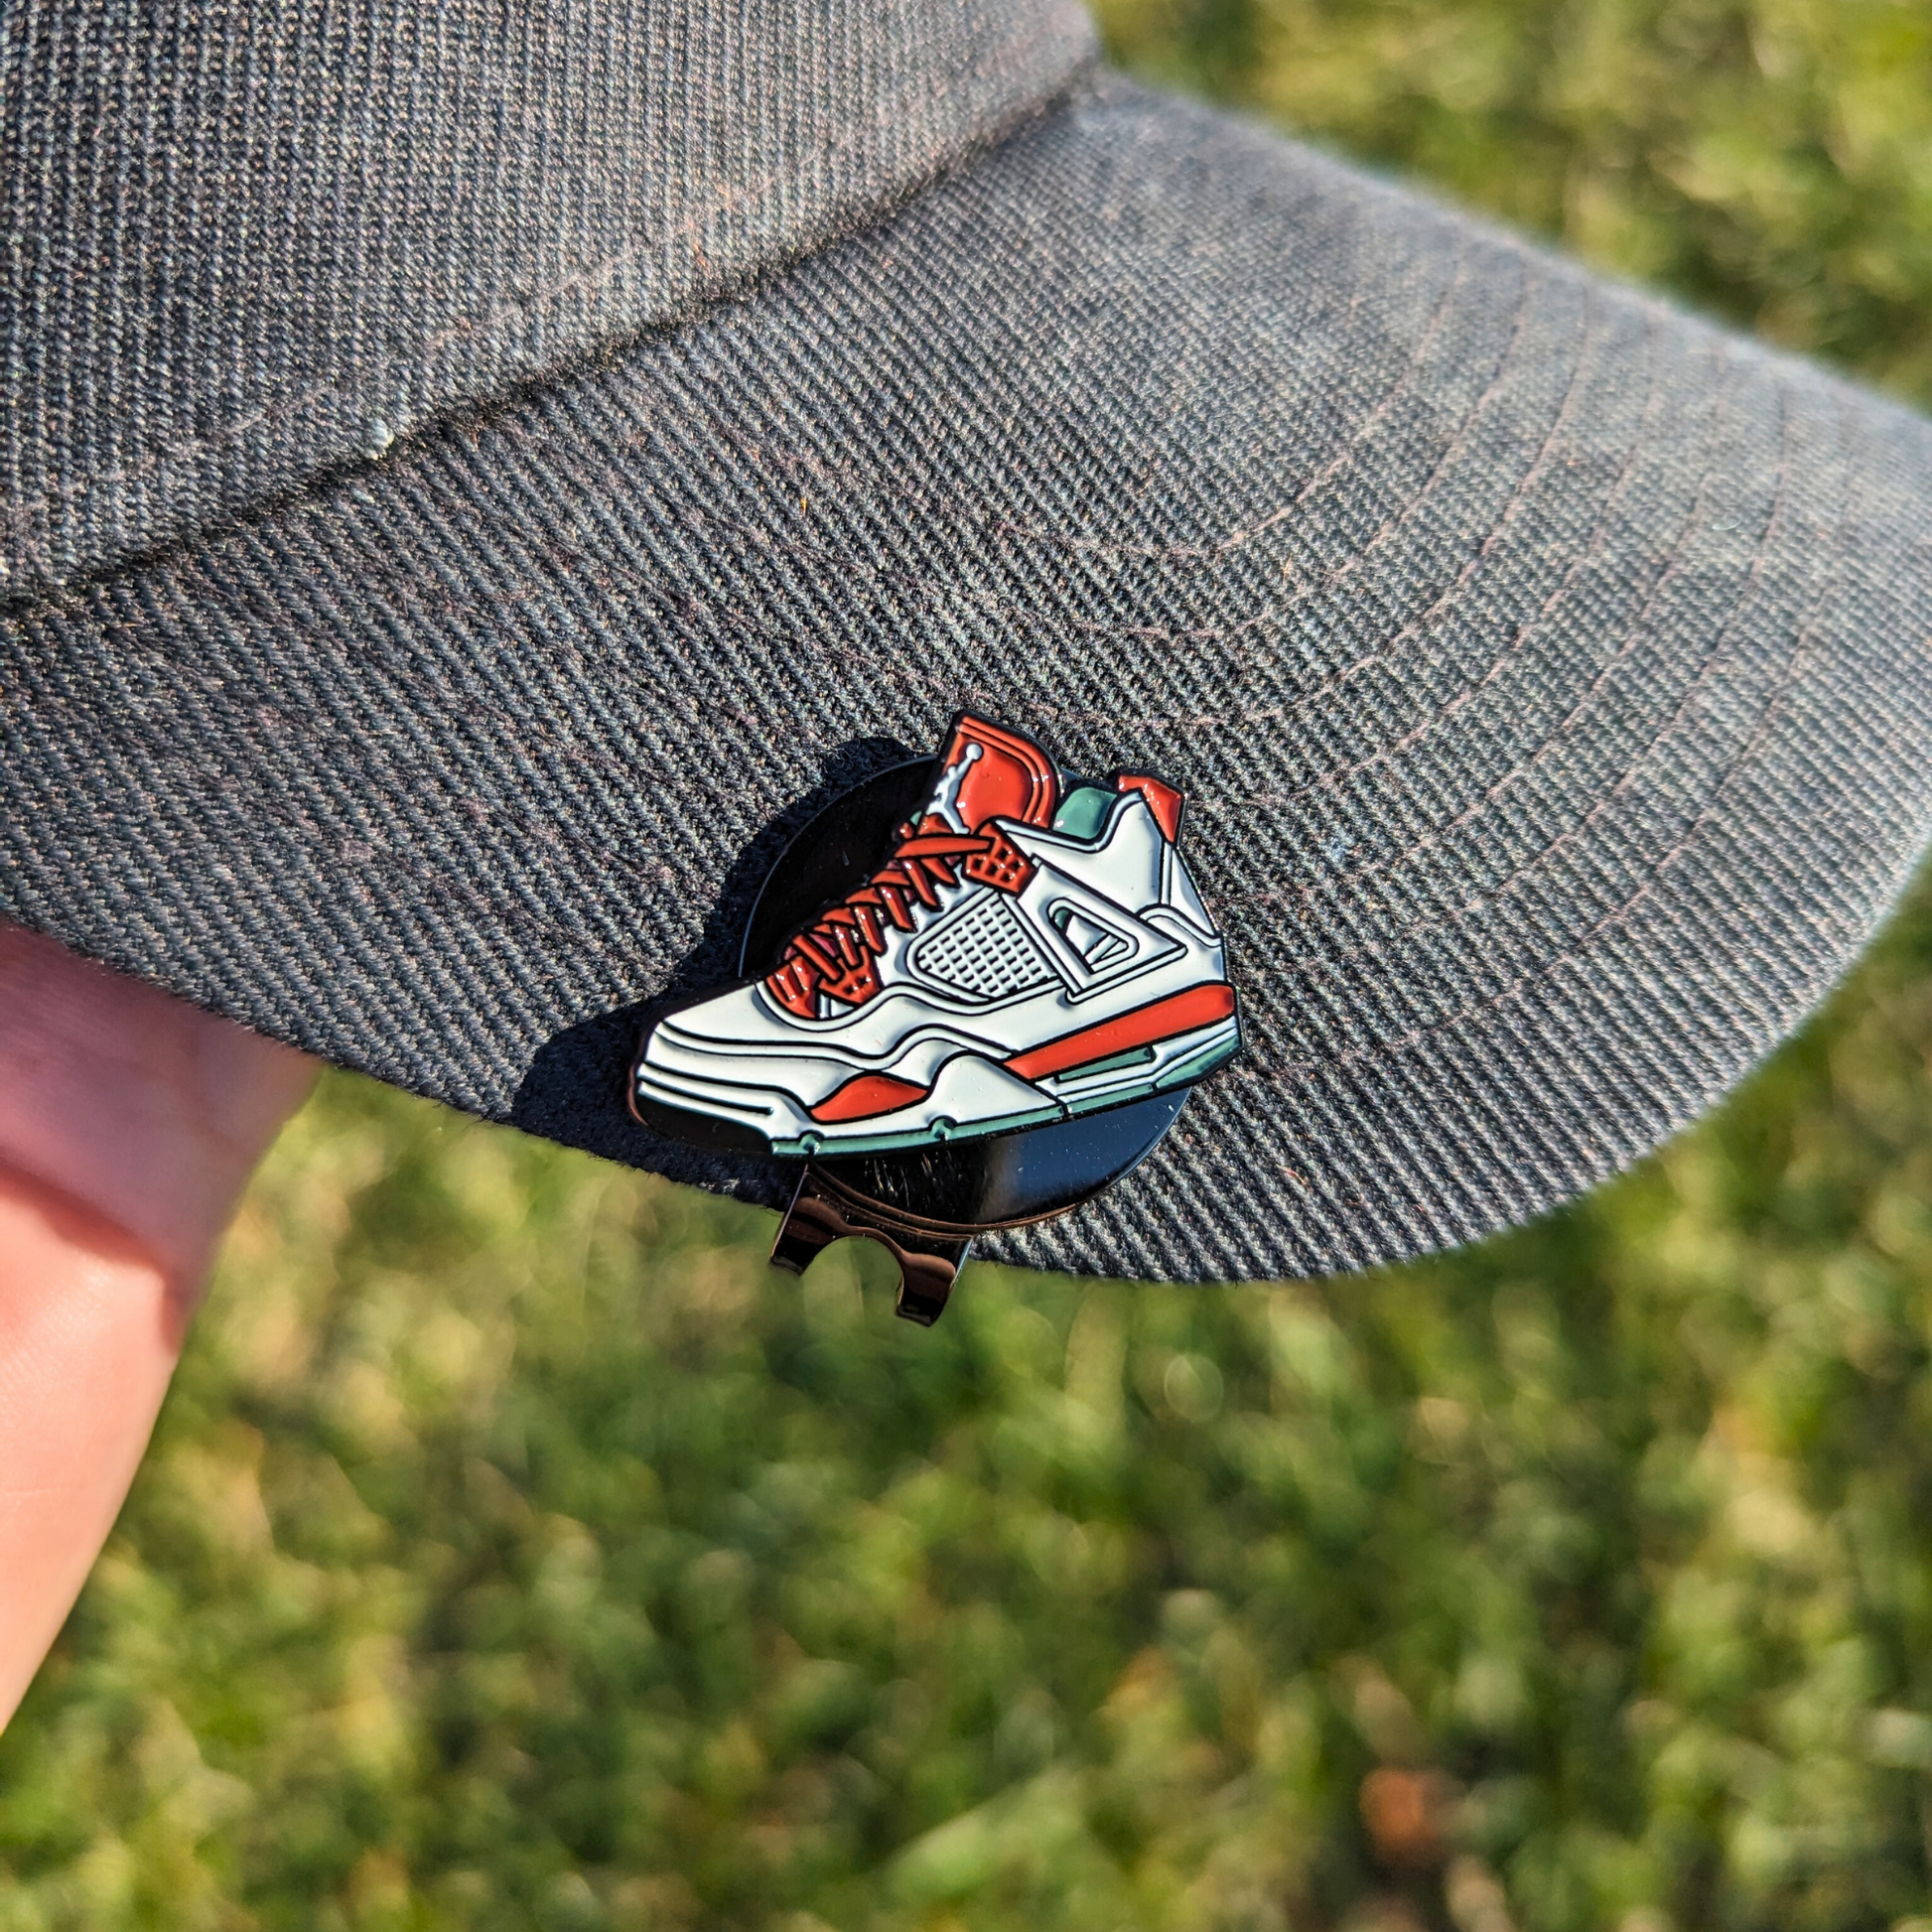 red and white jordans golf ball marker attached to hat with hat clip